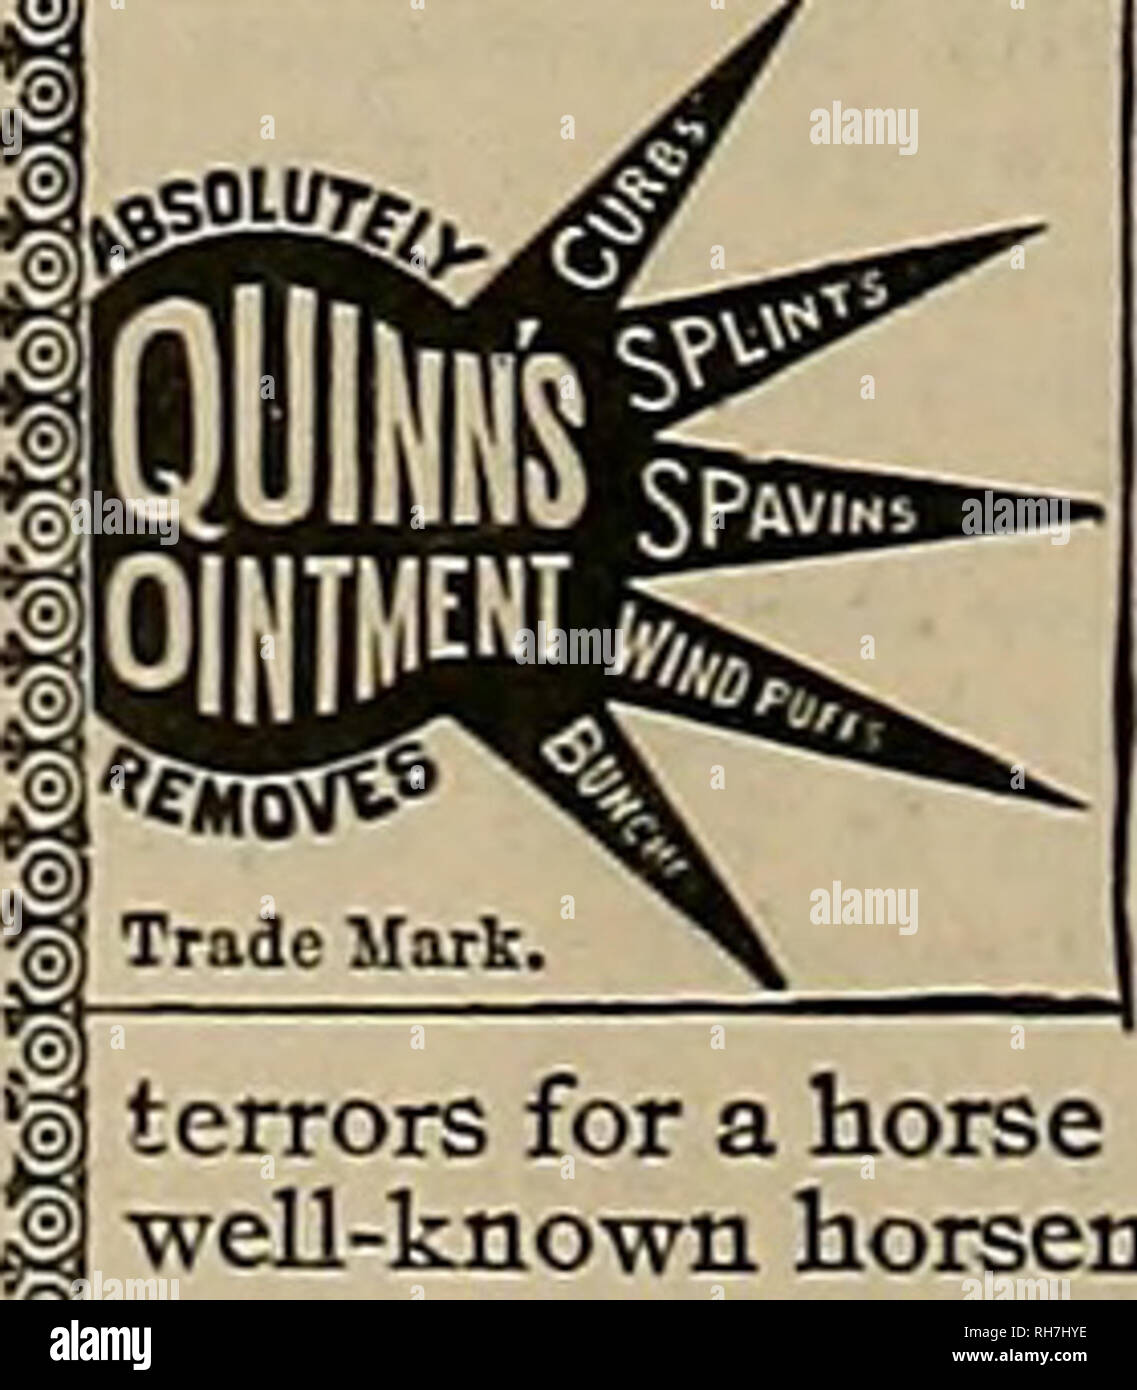 . Breeder and sportsman. Horses. 216 &lt;flty* fSfctsbm; mi&amp; gfp&amp;et&amp;mmu [September 23,1899 THE STOCKTON FAIR. [CONTINUED FBOM PAGE 211] Trotting, 2:12 class, purse Â§500, Galette, blk m, by Jud WilkesâGale (Durfee) 2 112 1 Hazel Kinney,bm, by McKioney (Maben) 5 5 2 1-3 Prince Gift, bg, by Good Gift (Kent)' 14 6 6 6 Claudius, ch n. by Nutwood Wilkes .-.^....(Barstow) 4 2 3 3 5 Neernut, b s, by Albert W (Brooks and Ford) 6 3 4 5 4 Timeâ2:12,4, 2:12, 2:129^, 2:14$$, 2:15^. Running, five furlongs for maiden two-year-olds, purse $200 Togalog, by FoosoâRay B (Frawley) 1 El Arte (Sullivan Stock Photo